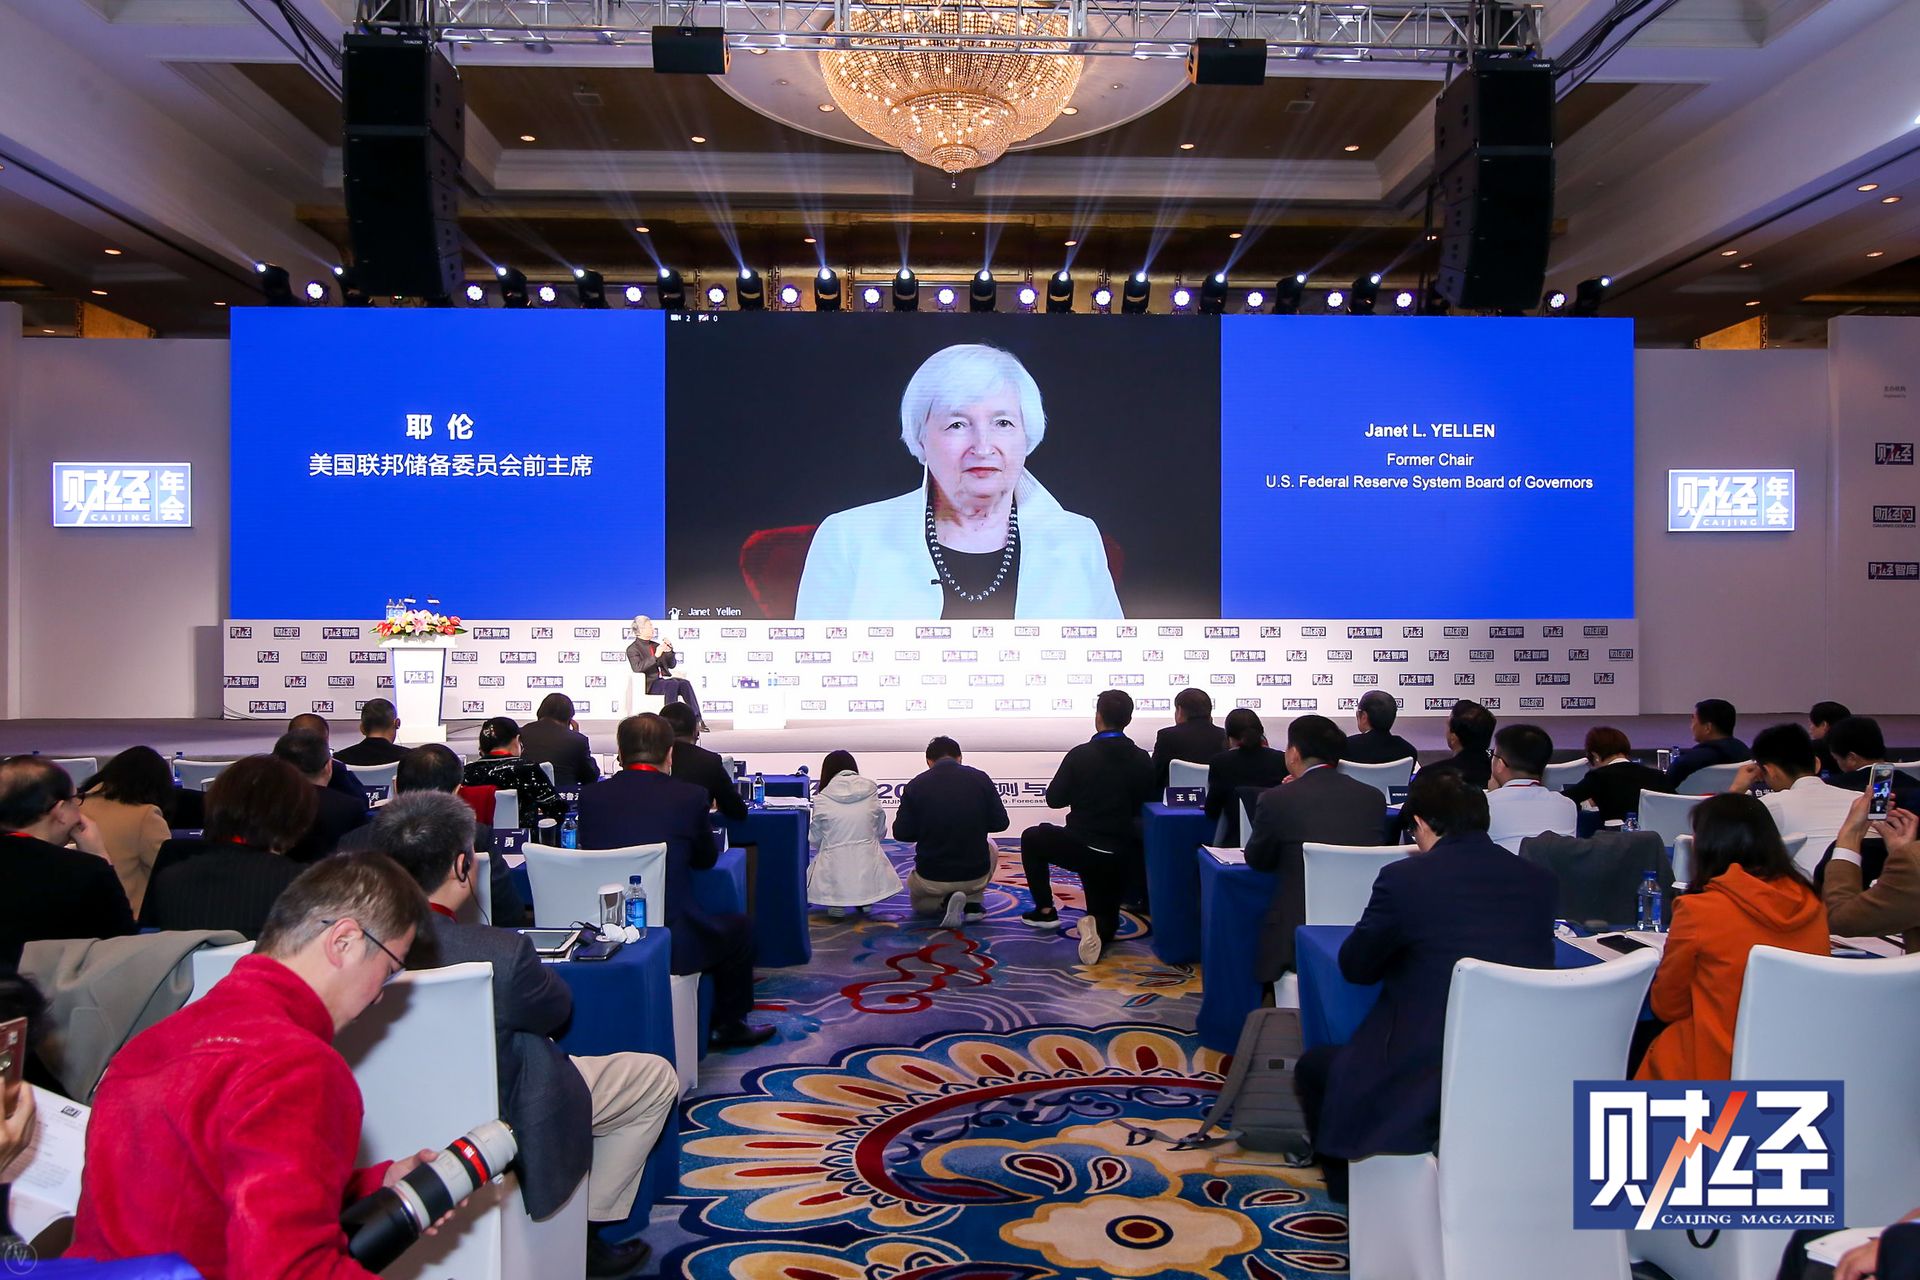 Janet Yellen, former chair of the Board of Governors of the U.S. Federal Reserve System, speaks via video link at the 16th Caijing Annual Conference held in Beijing on Nov. 13, 2018. [Photo courtesy of Caijing Magazine]